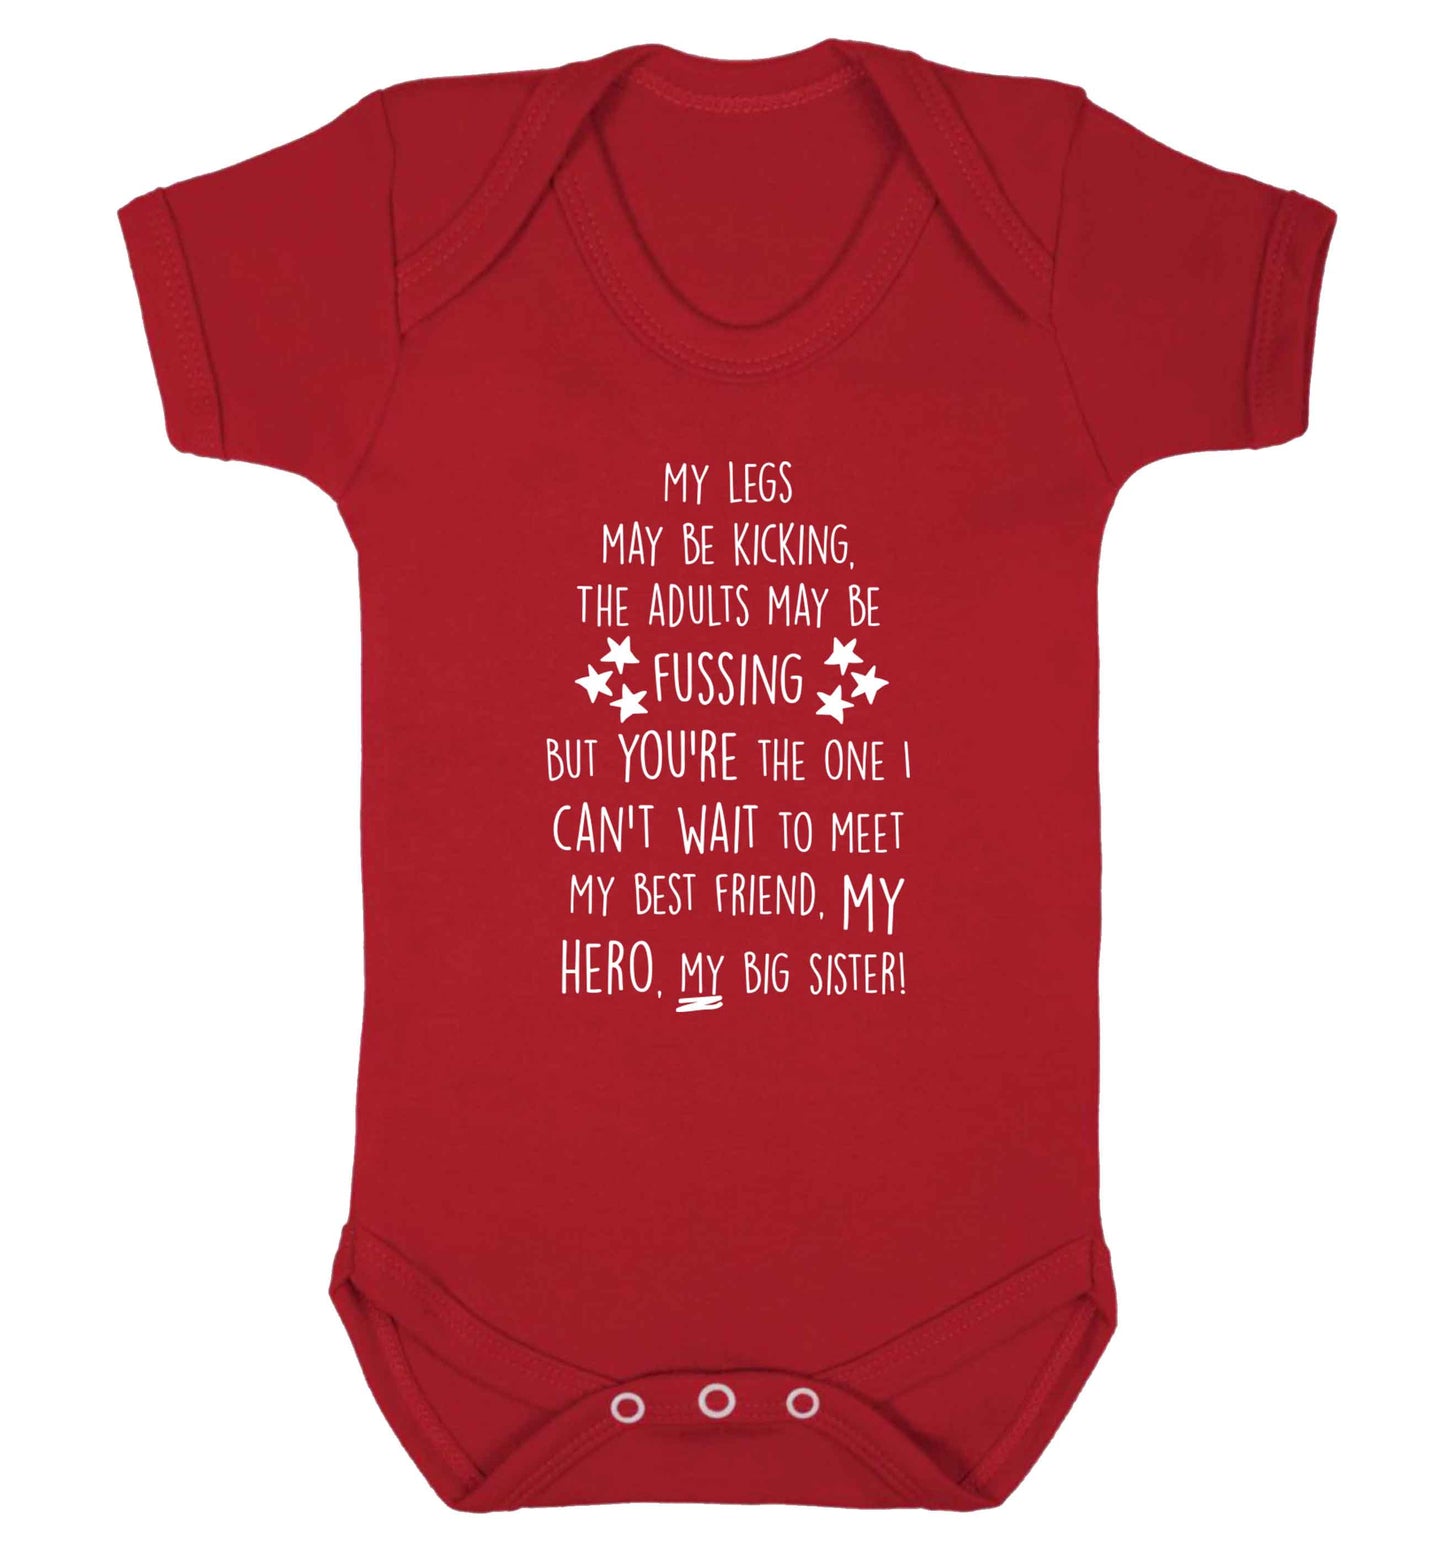 A poem from bump to big sister Baby Vest red 18-24 months